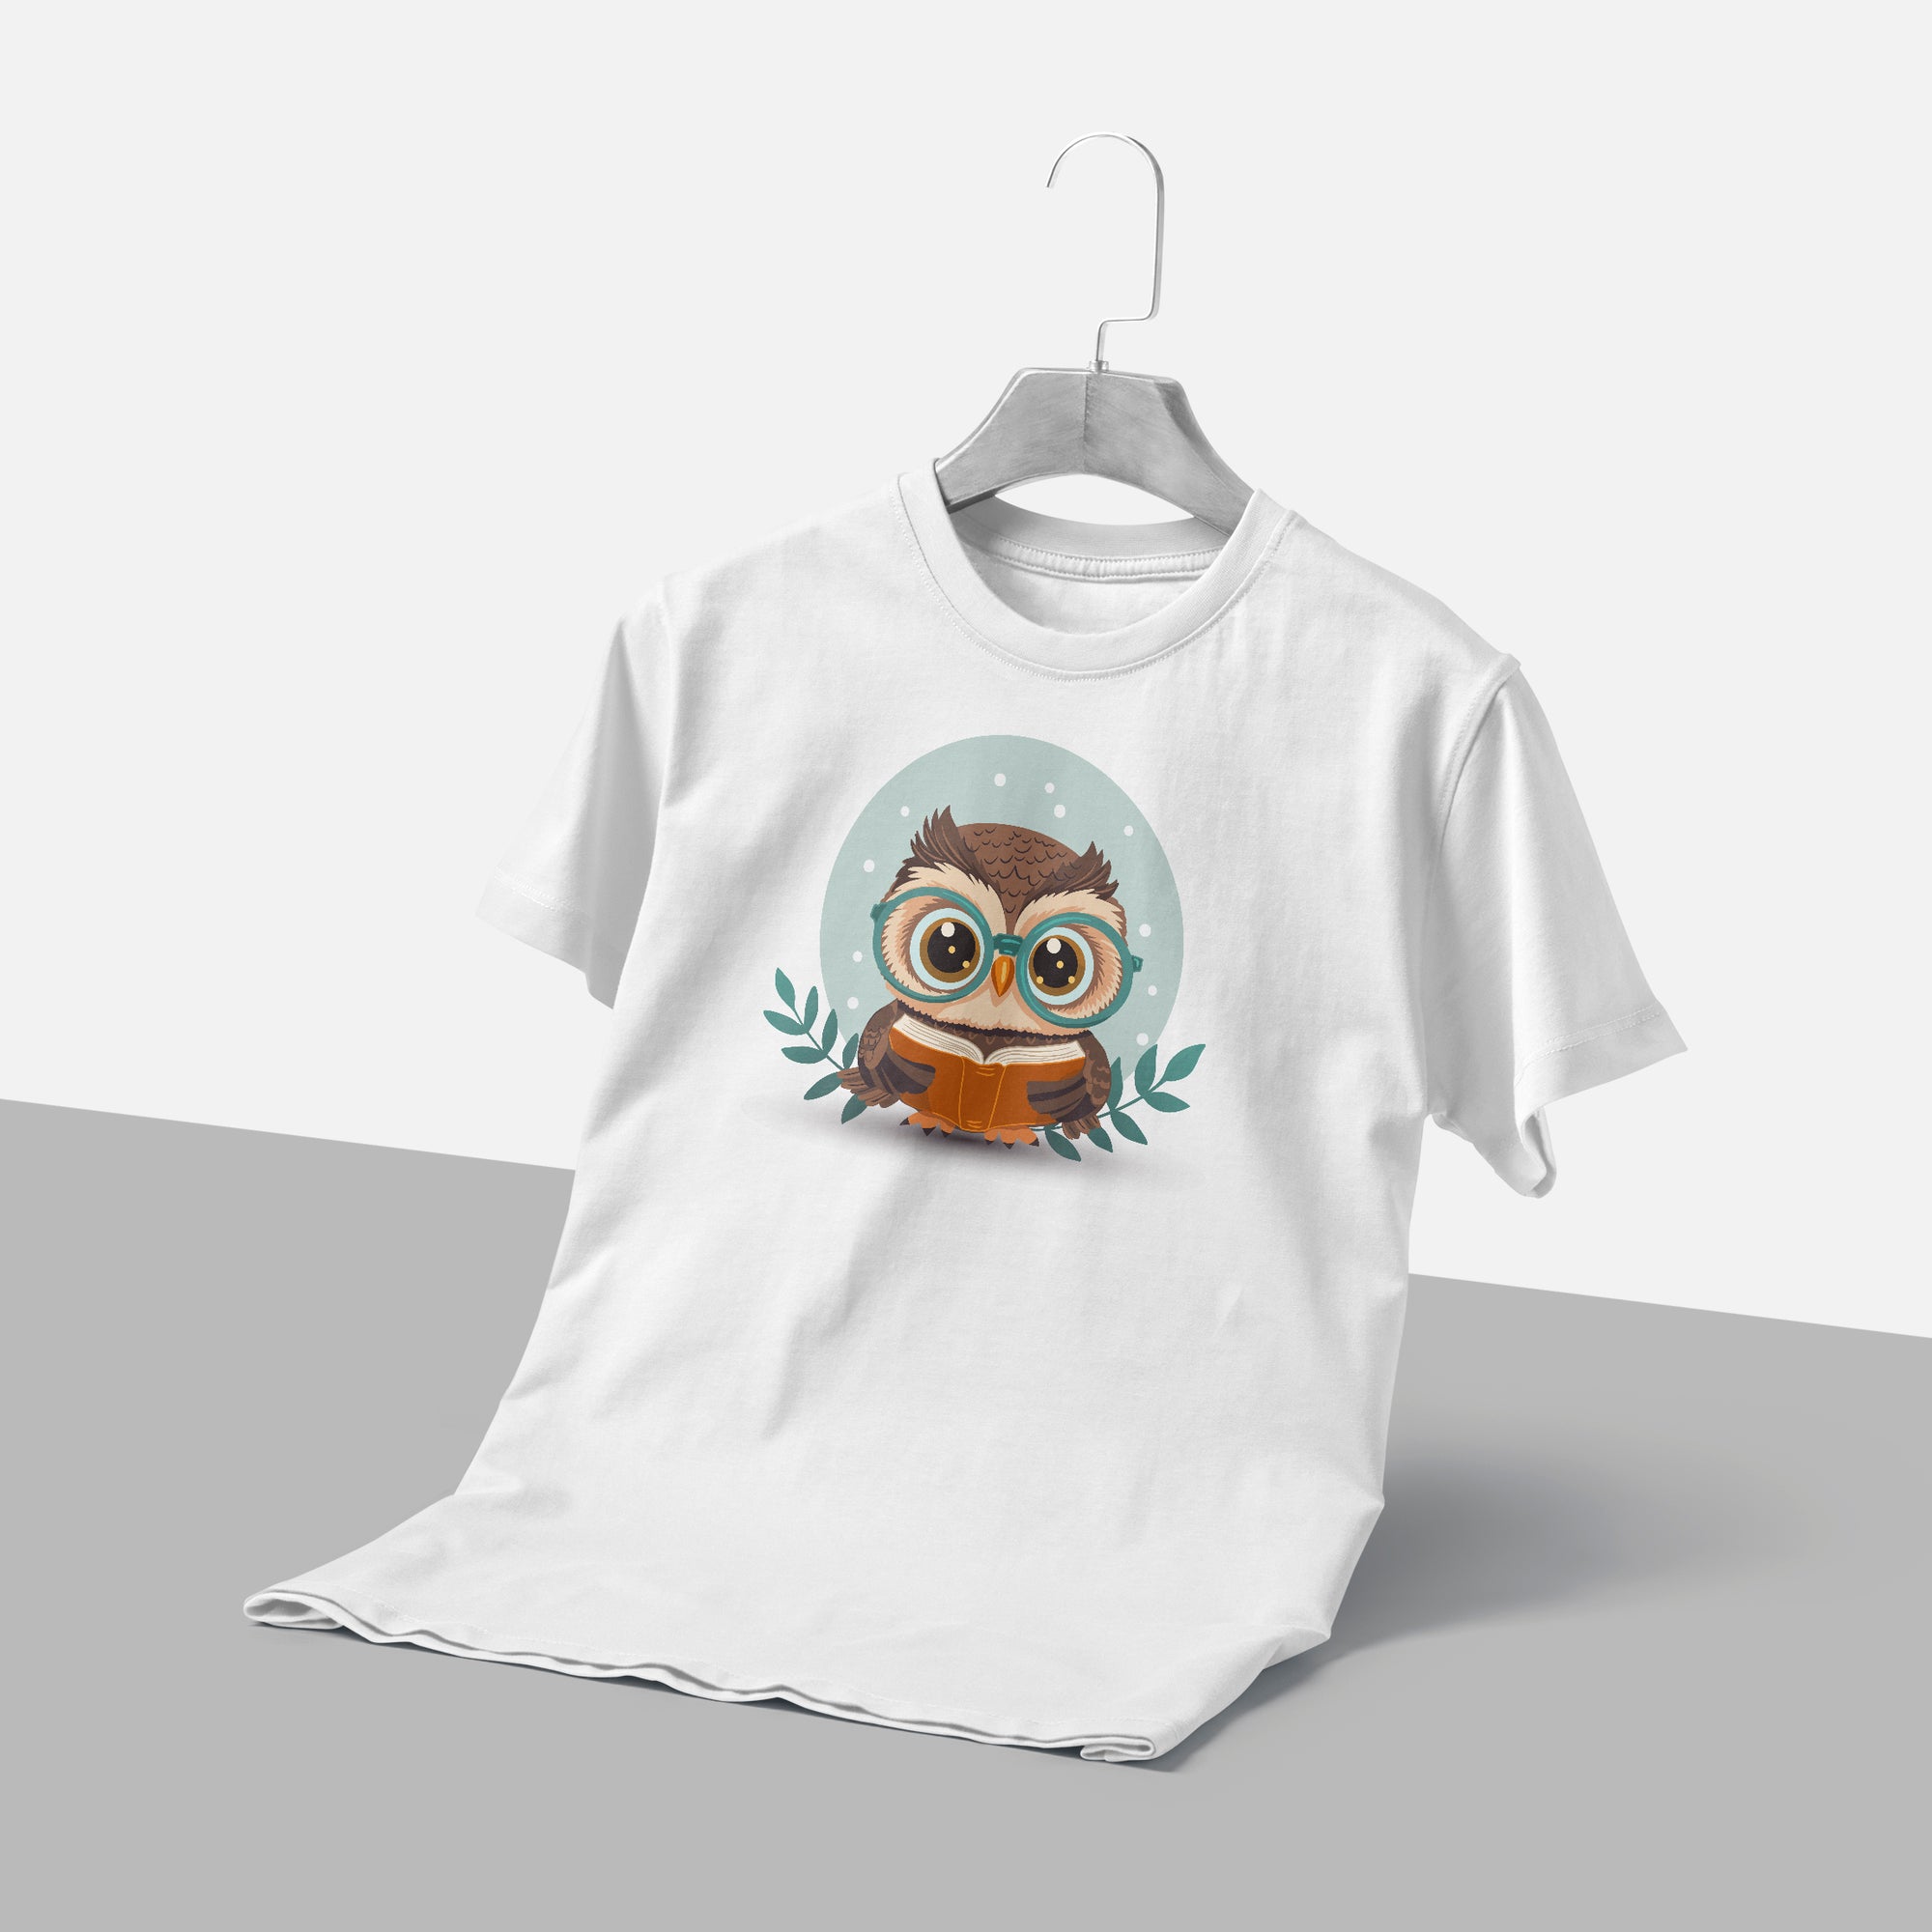 Scholarly Owl with Glasses T-Shirt